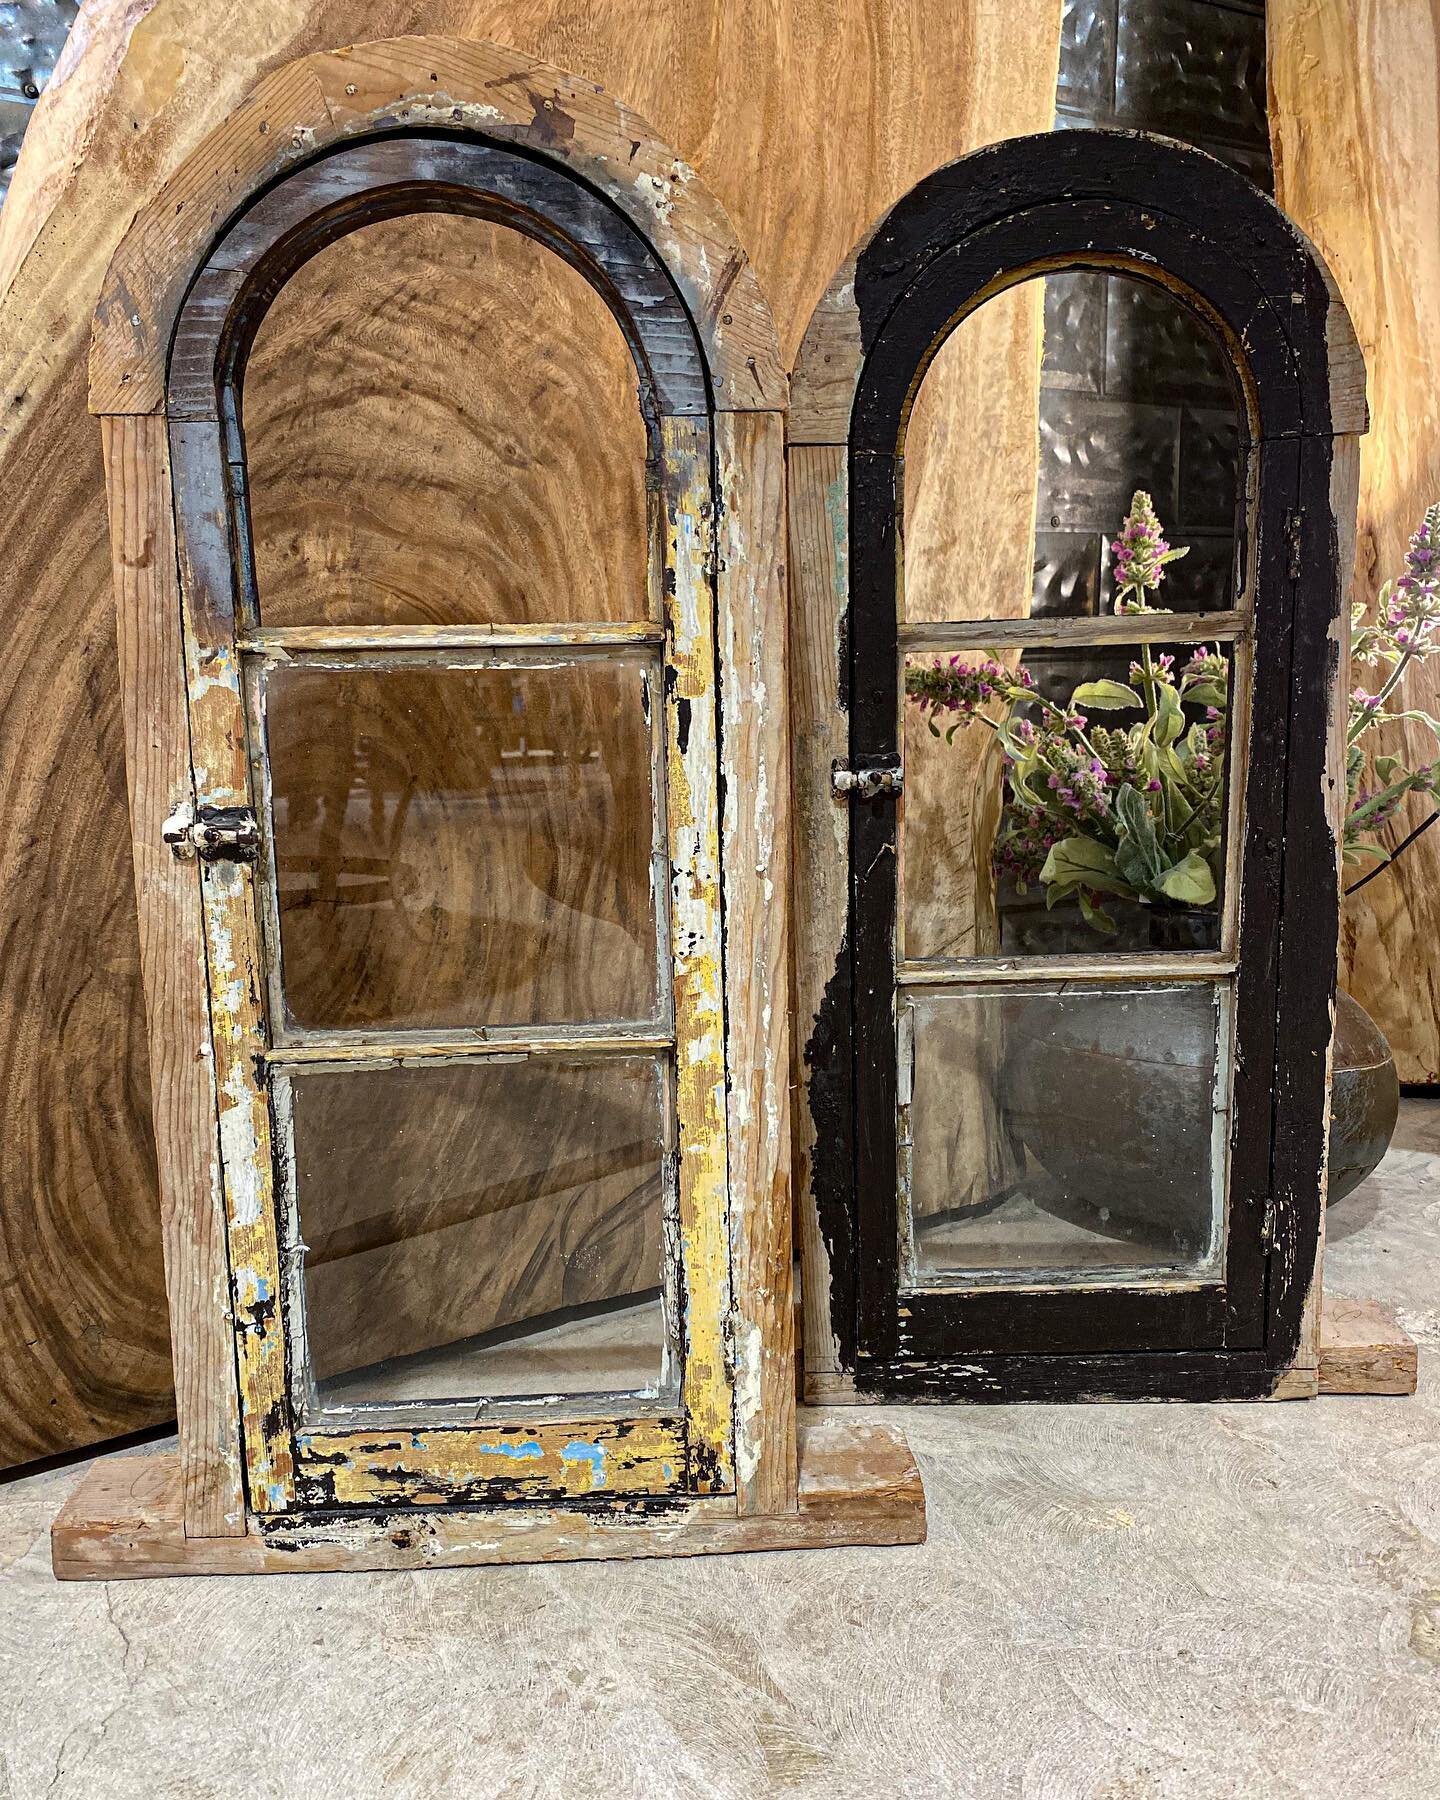 More amazing salvage windows!! 

We are located at 1499 S. Main St., next to the Dog &amp; Pony Grill. Open Mon-Fri 10-5, Sat 10-6, Sun 12-3. 

#architecturalsalvage 
#boerne #boernetexas #boernetx #shopboerne #visitboerne #sobo #southboerne #boernem